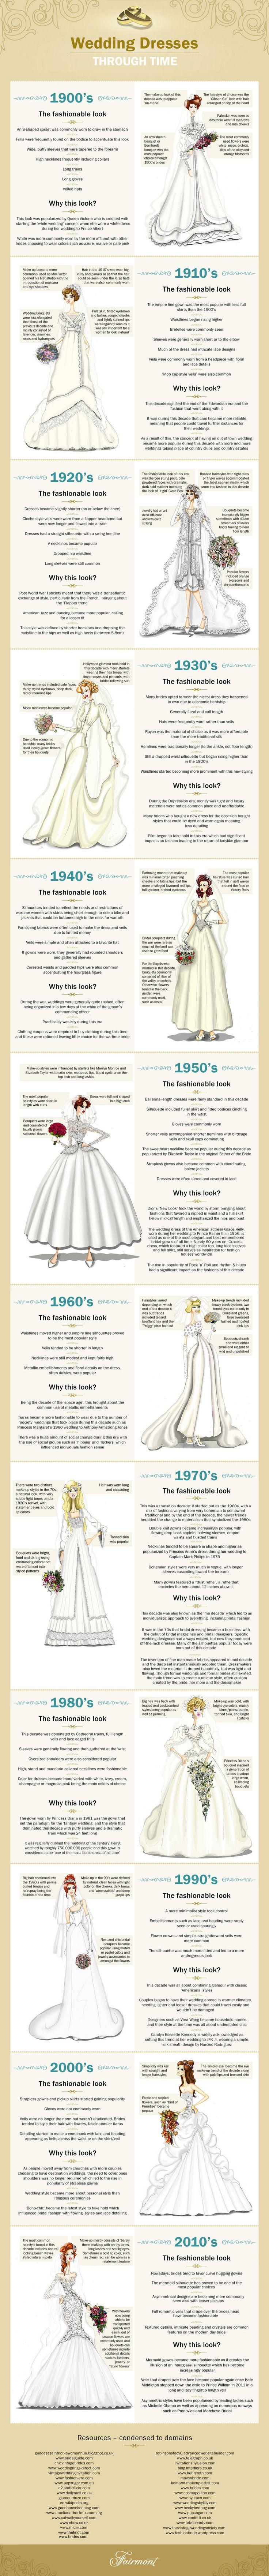 Wedding - This Is How Wedding Dress Trends Have Changed Over The Last Century